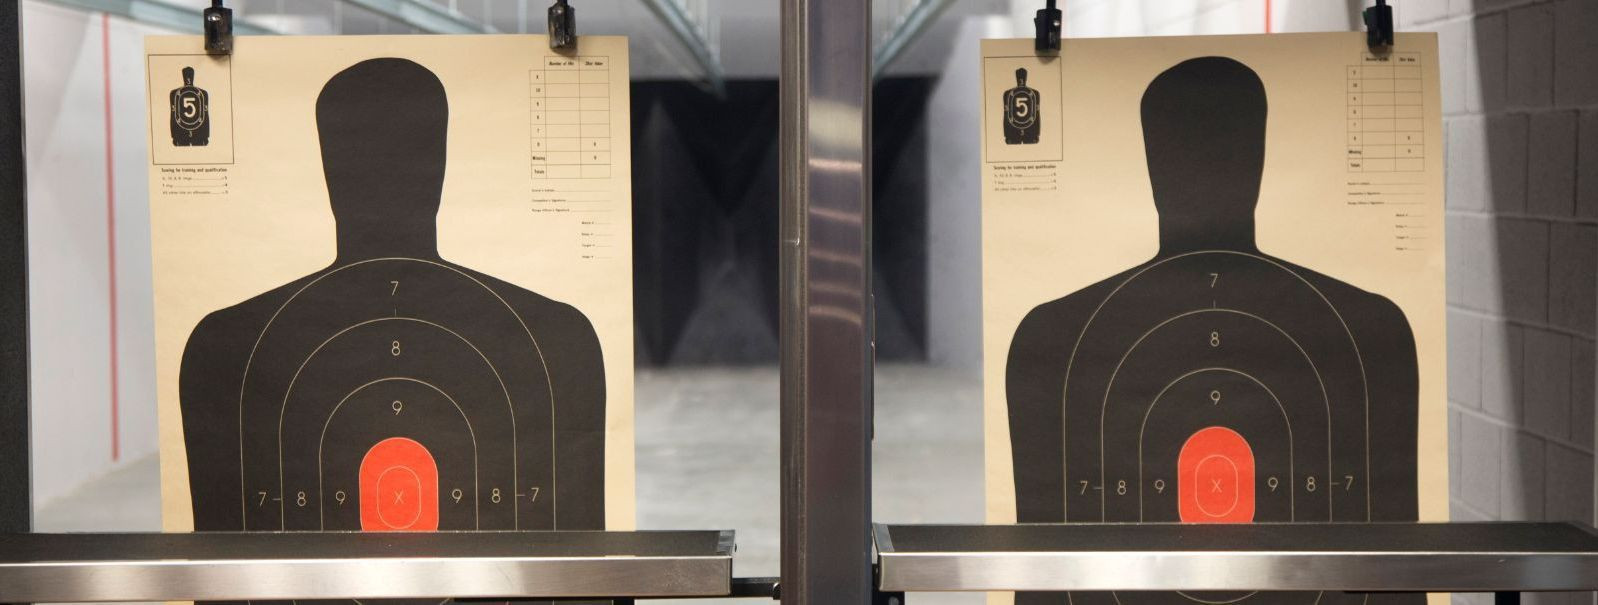 Firearm safety training begins with mastering the basic principles of handling a weapon responsibly. These principles include always treating the firearm as if 